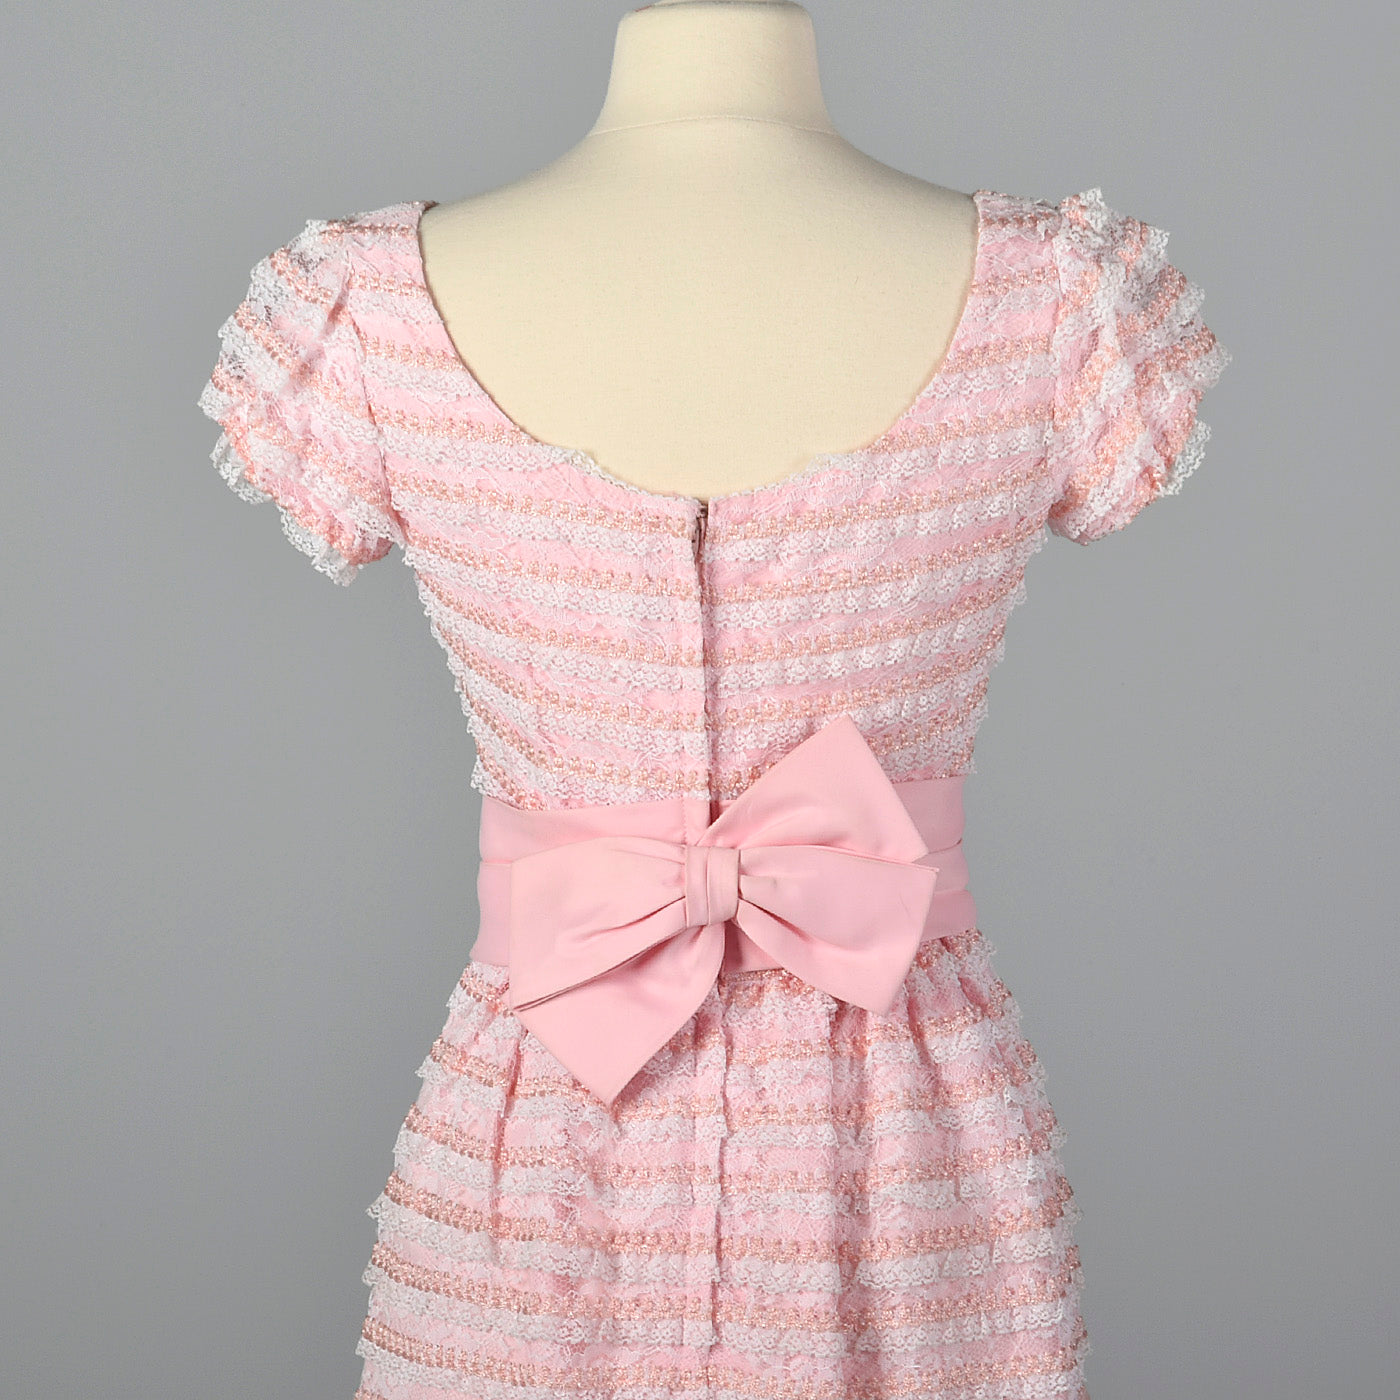 1960s Pink and White Lace Pencil Dress